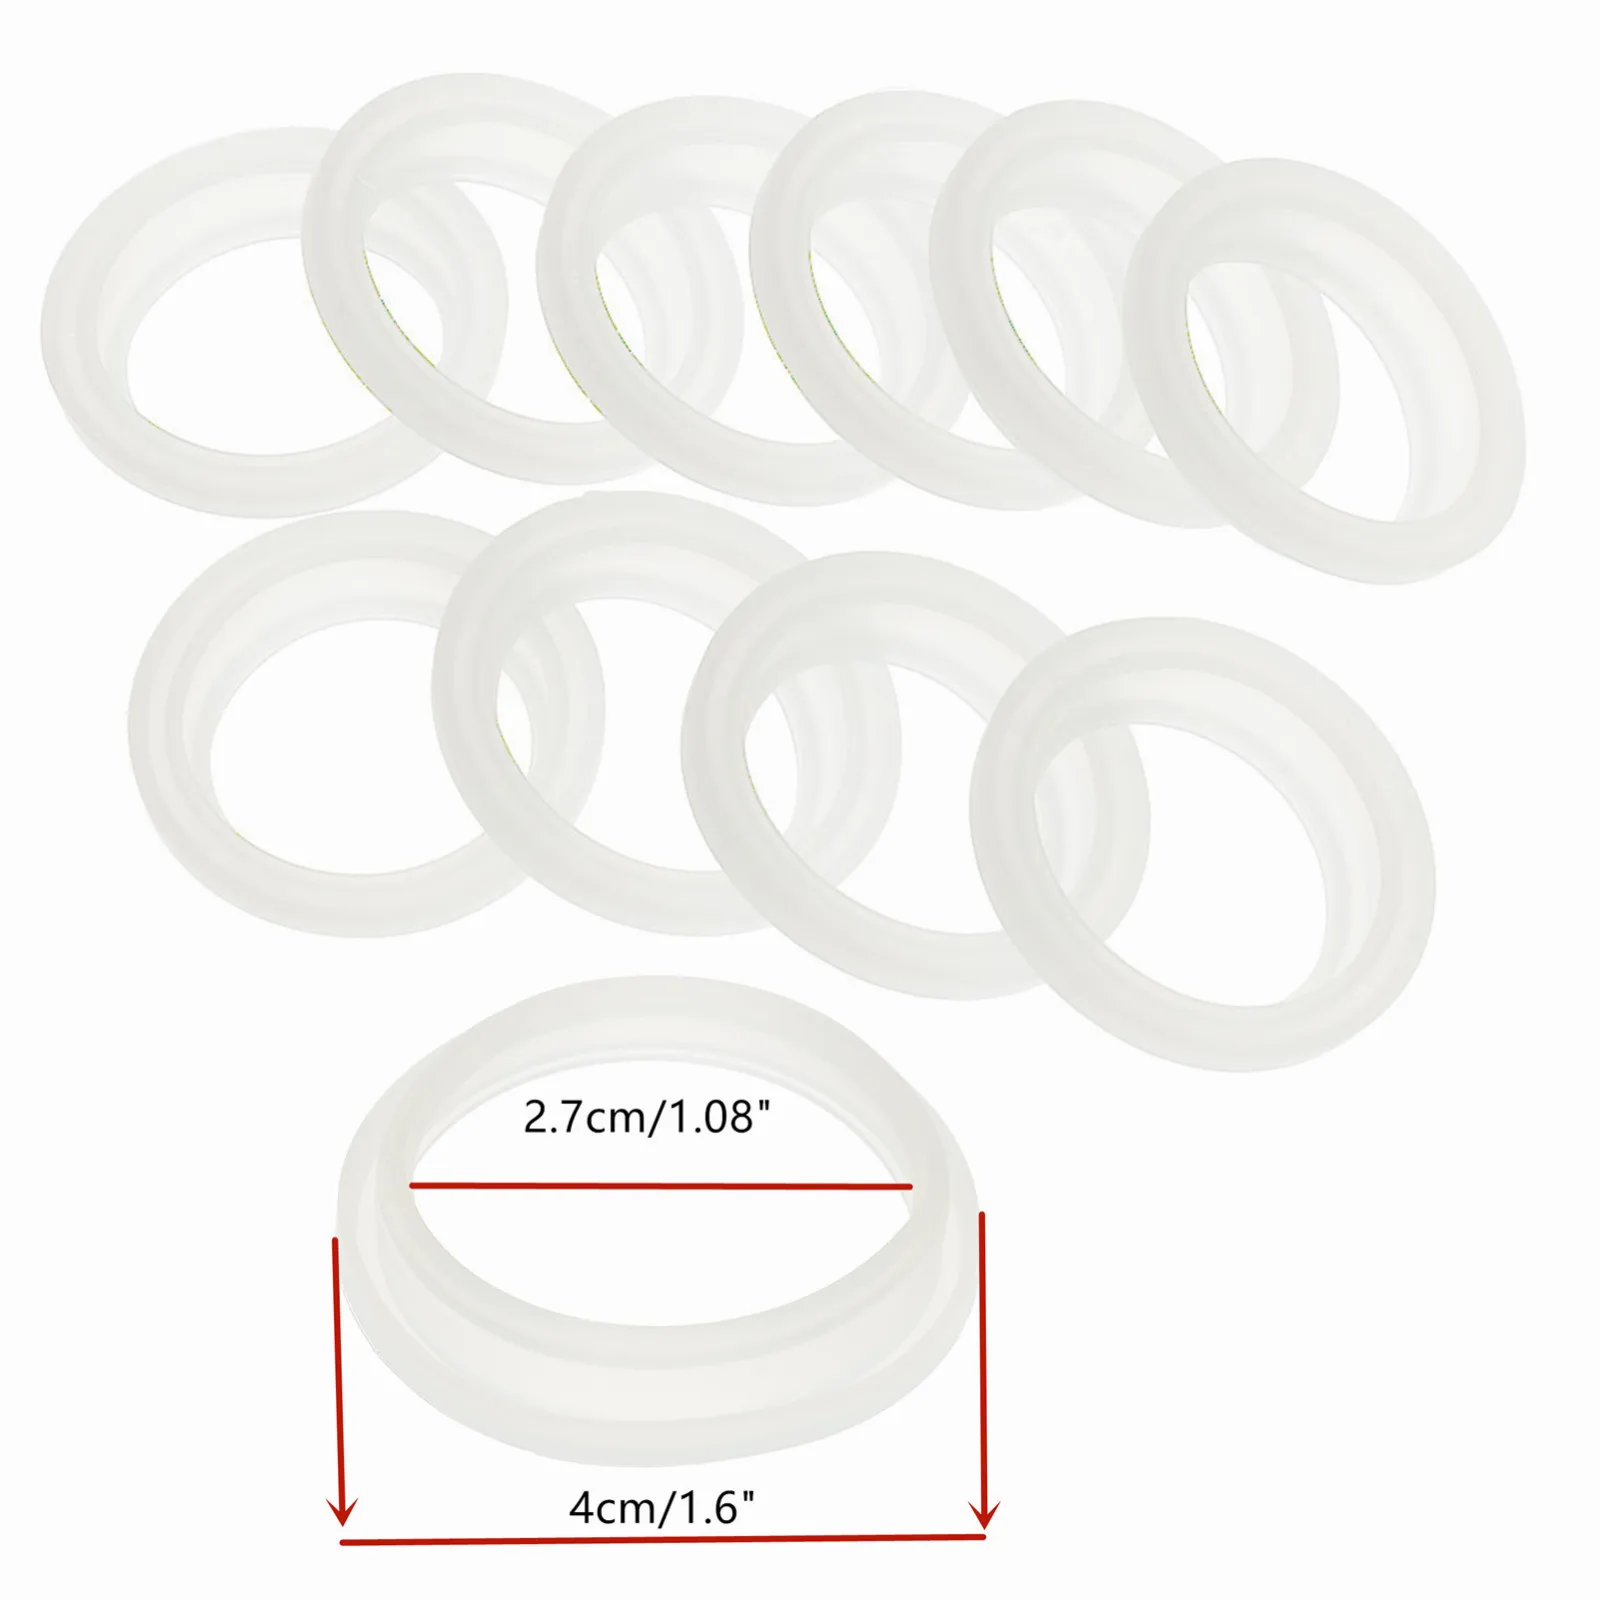 https://ae01.alicdn.com/kf/S690adc30efca435782b007fae6d42499l/10Pcs-Silicone-Sealing-O-Rings-Outdoor-Vacuum-Thermoses-Bottles-Sealing-Ring-Pad-Fasteners-Bottle-Cover-Cup.jpg